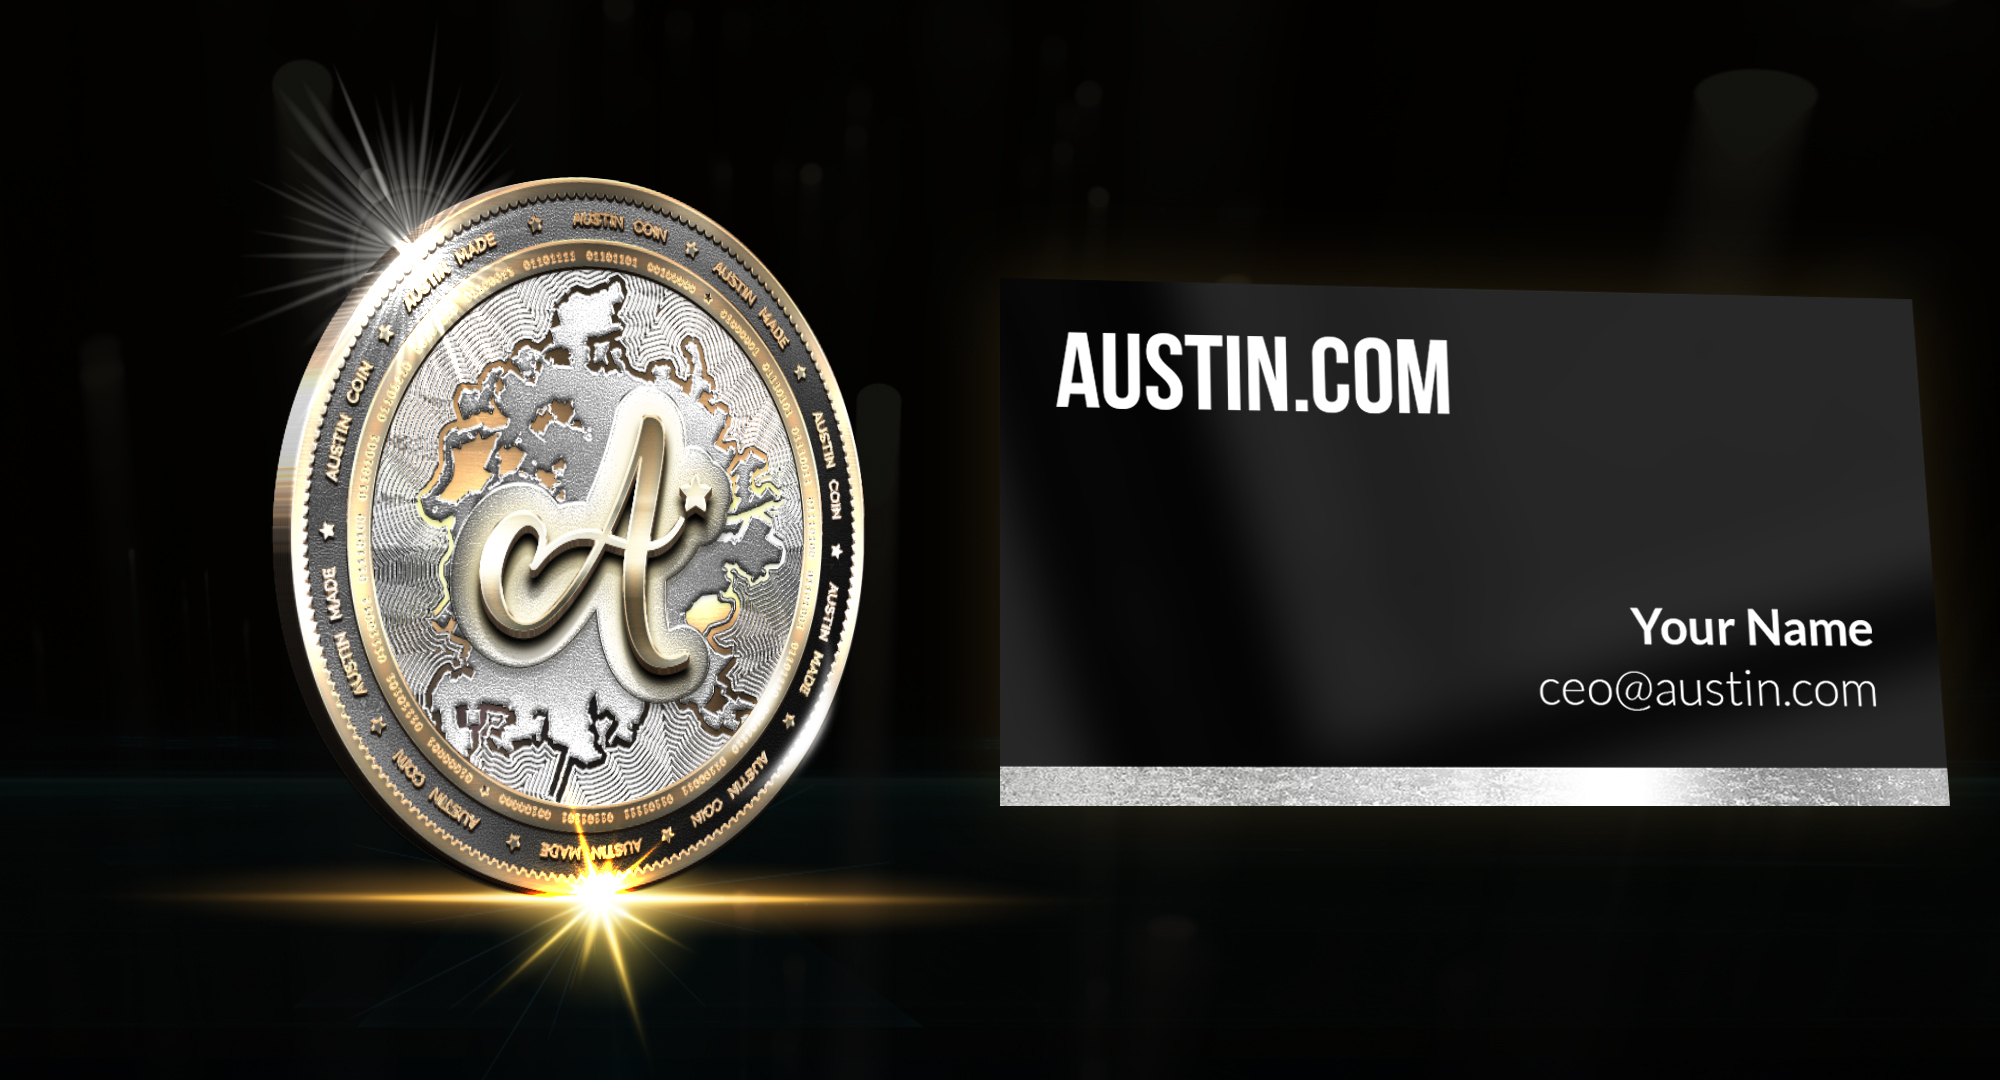 Austin City Crypto-Currency Token (concept) and Custom @Austin.com Email Leasing.